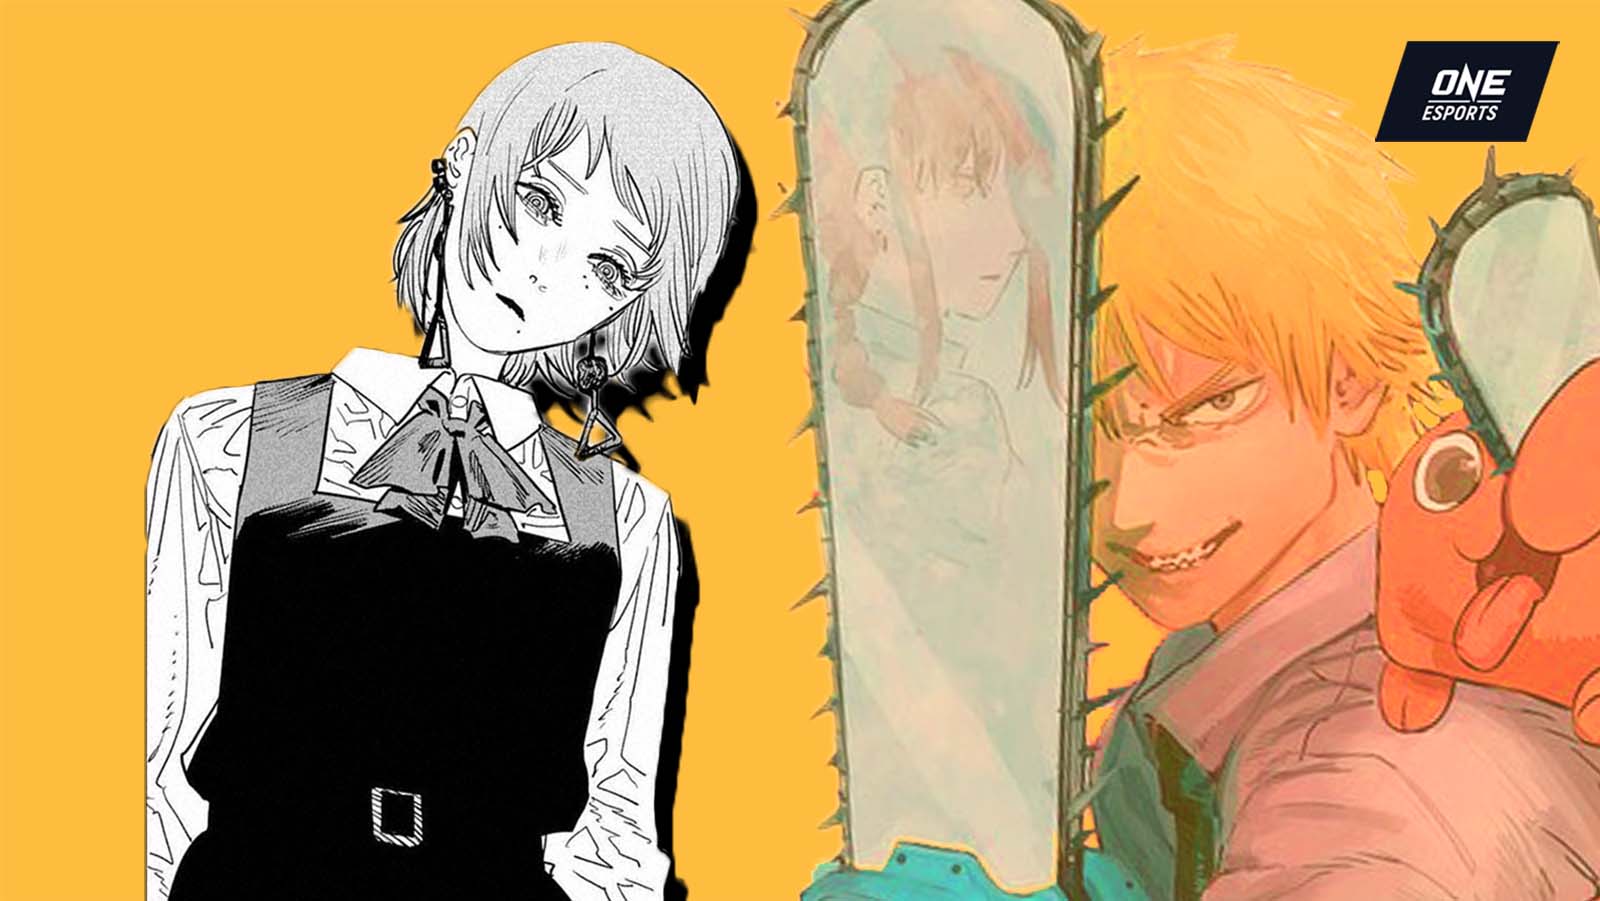 Chainsaw Man, Where to Stream and Watch